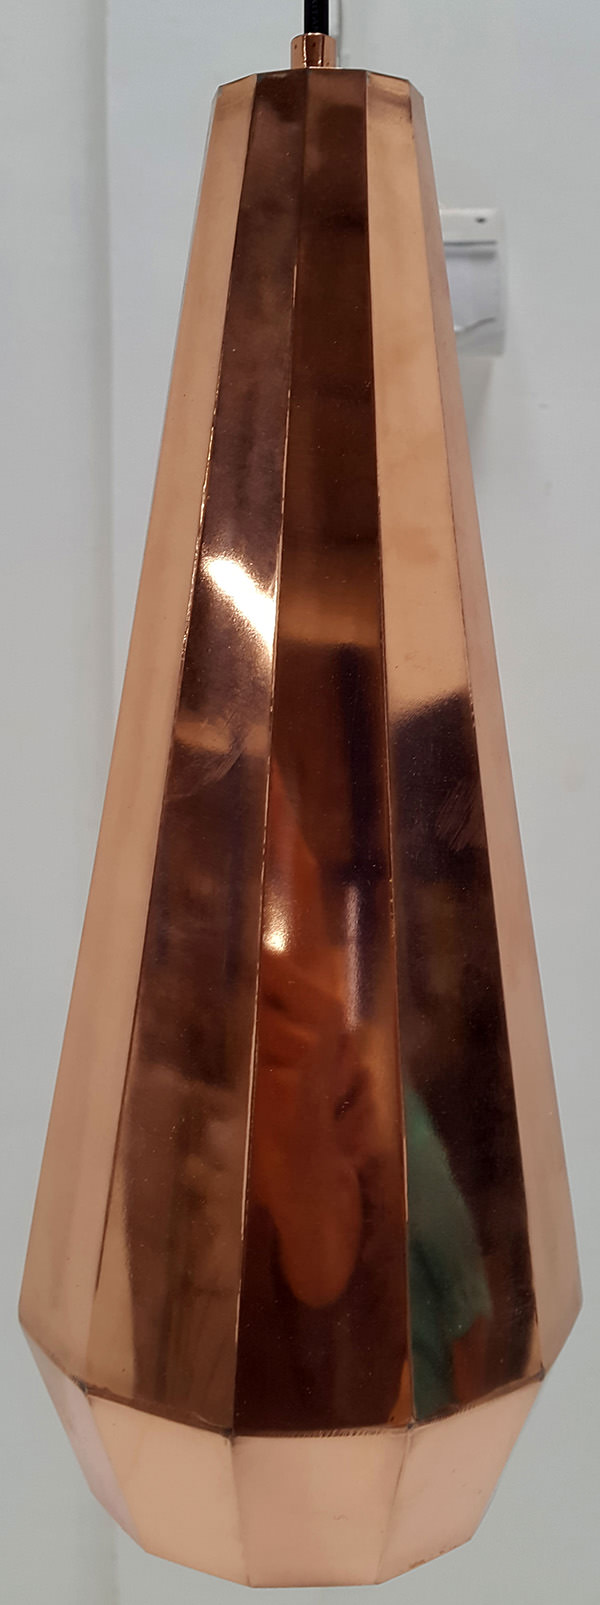 natural copper hanging lamp with geometric